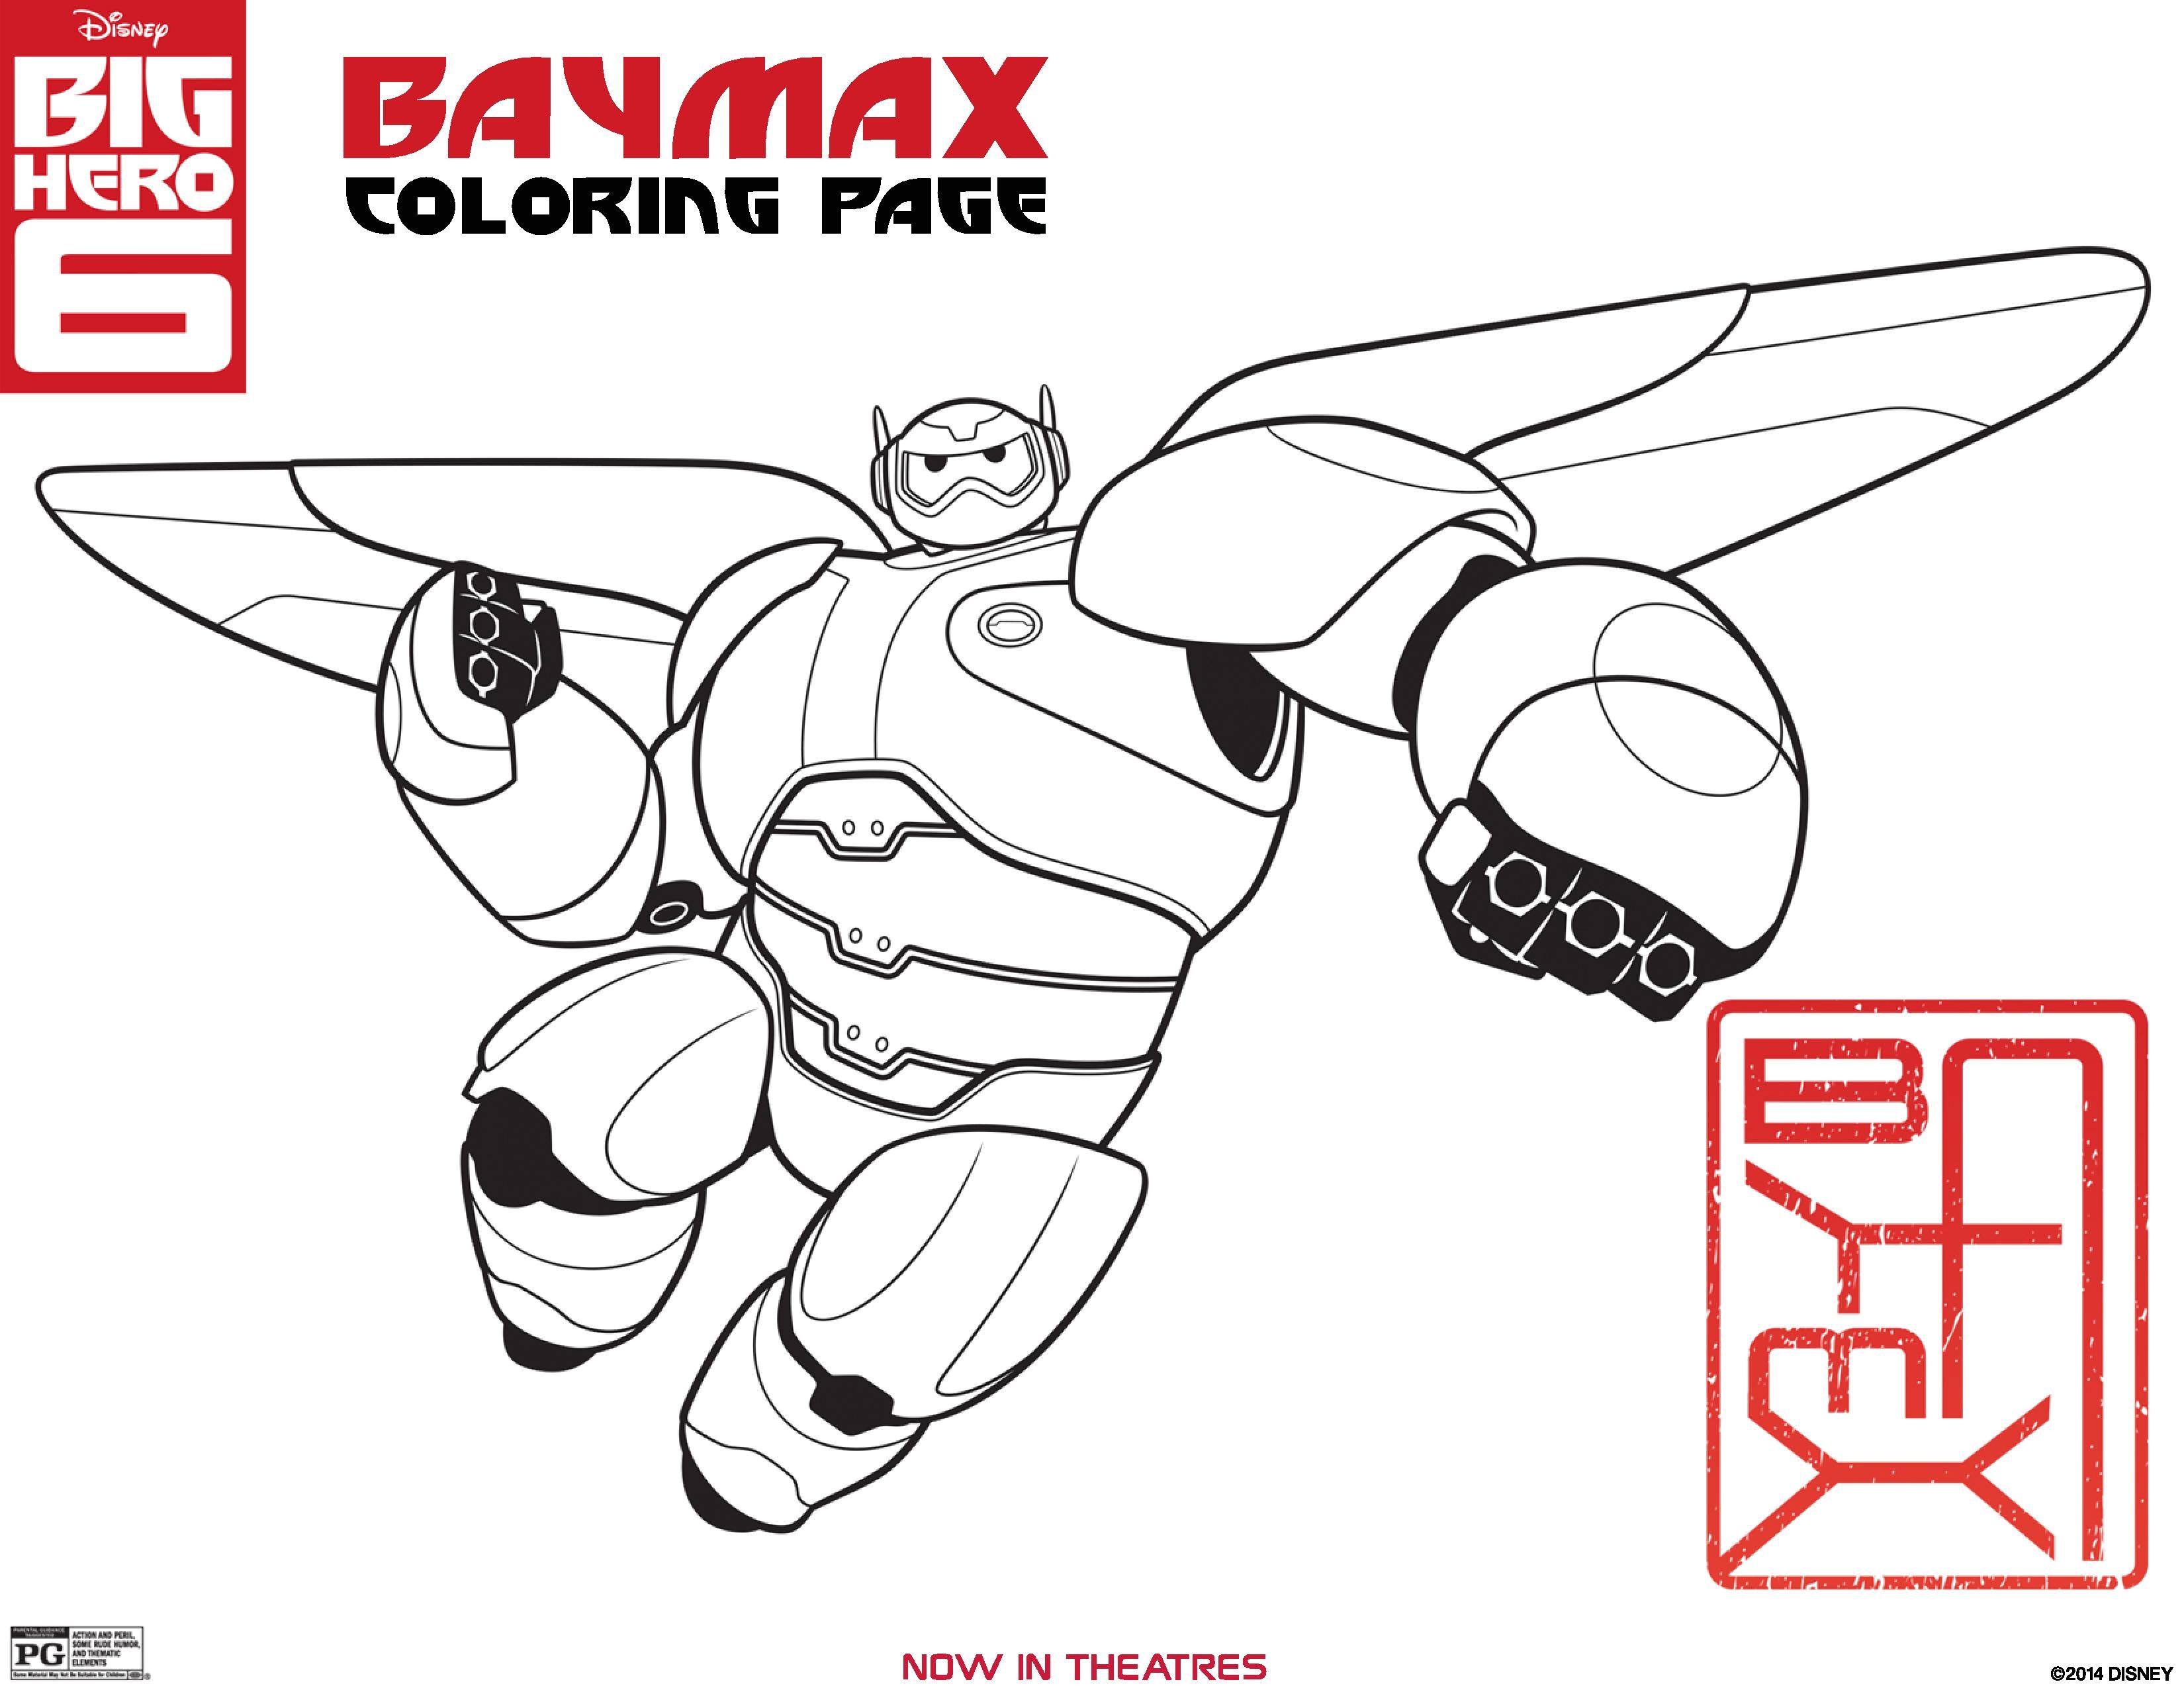 BIG HERO 6 Coloring Pages, Activity Sheets, and Printables